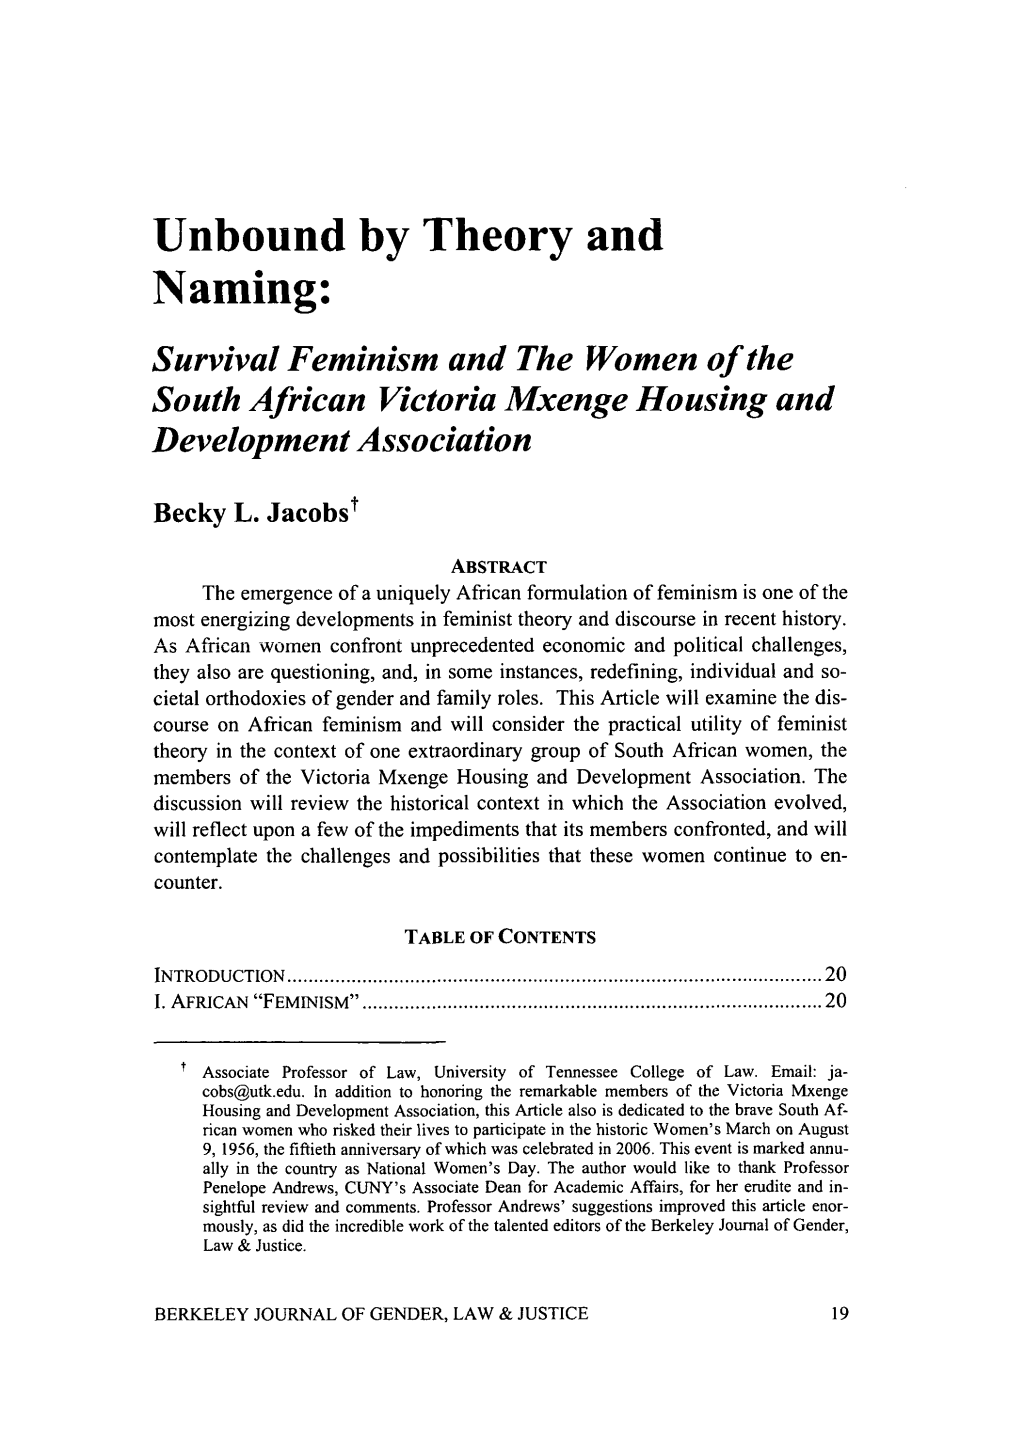 Survival Feminism and the Women of the South African Victoria Mxenge Housing and Development Association